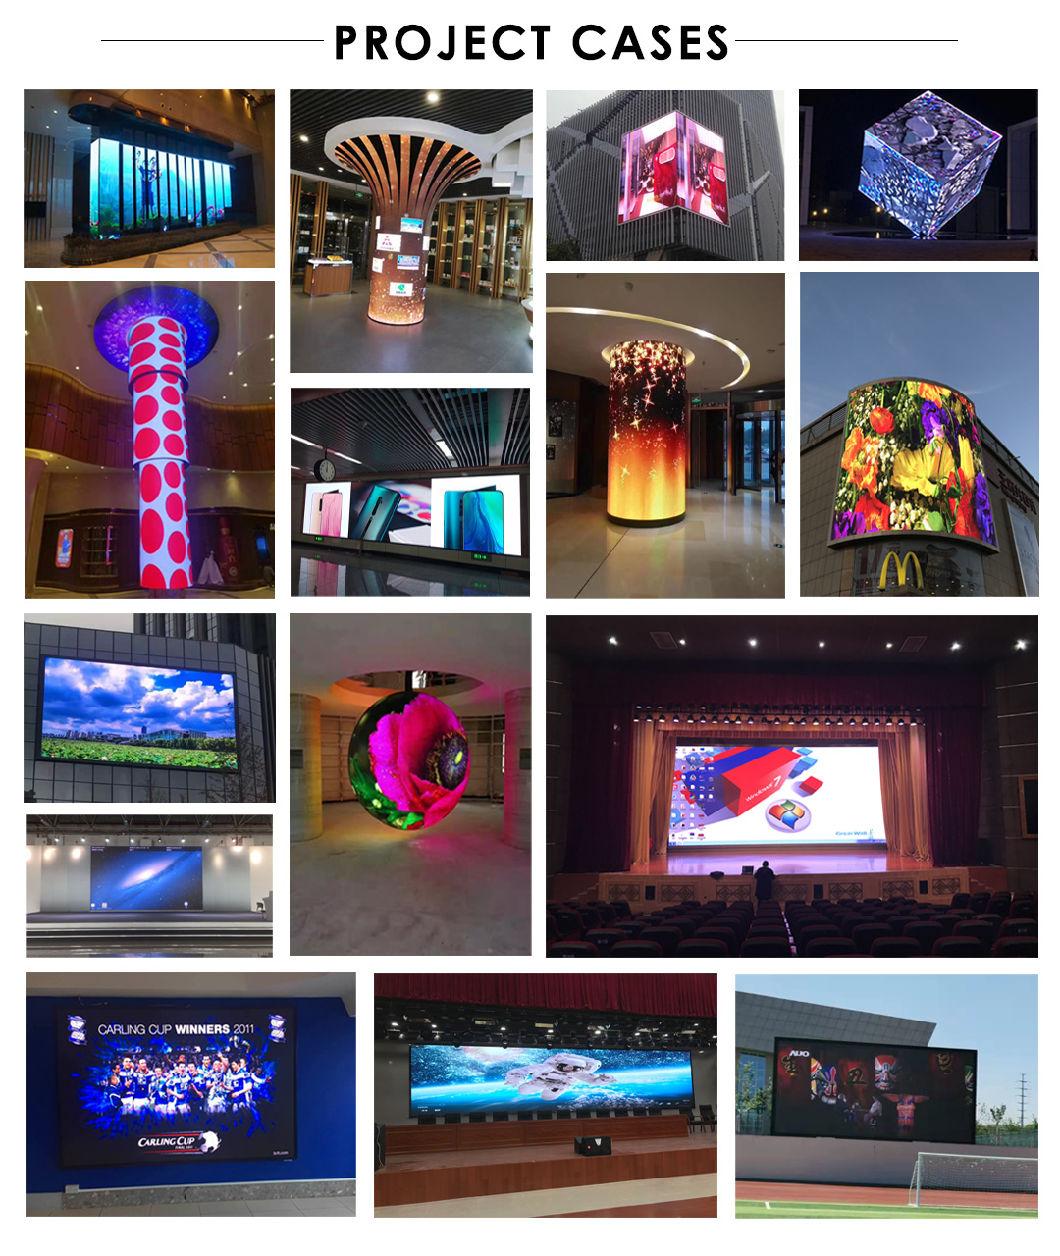 Indoor Full Color LED Display Panel P1.86 Small Pixel Pitch 1.86mm LED Display Screen